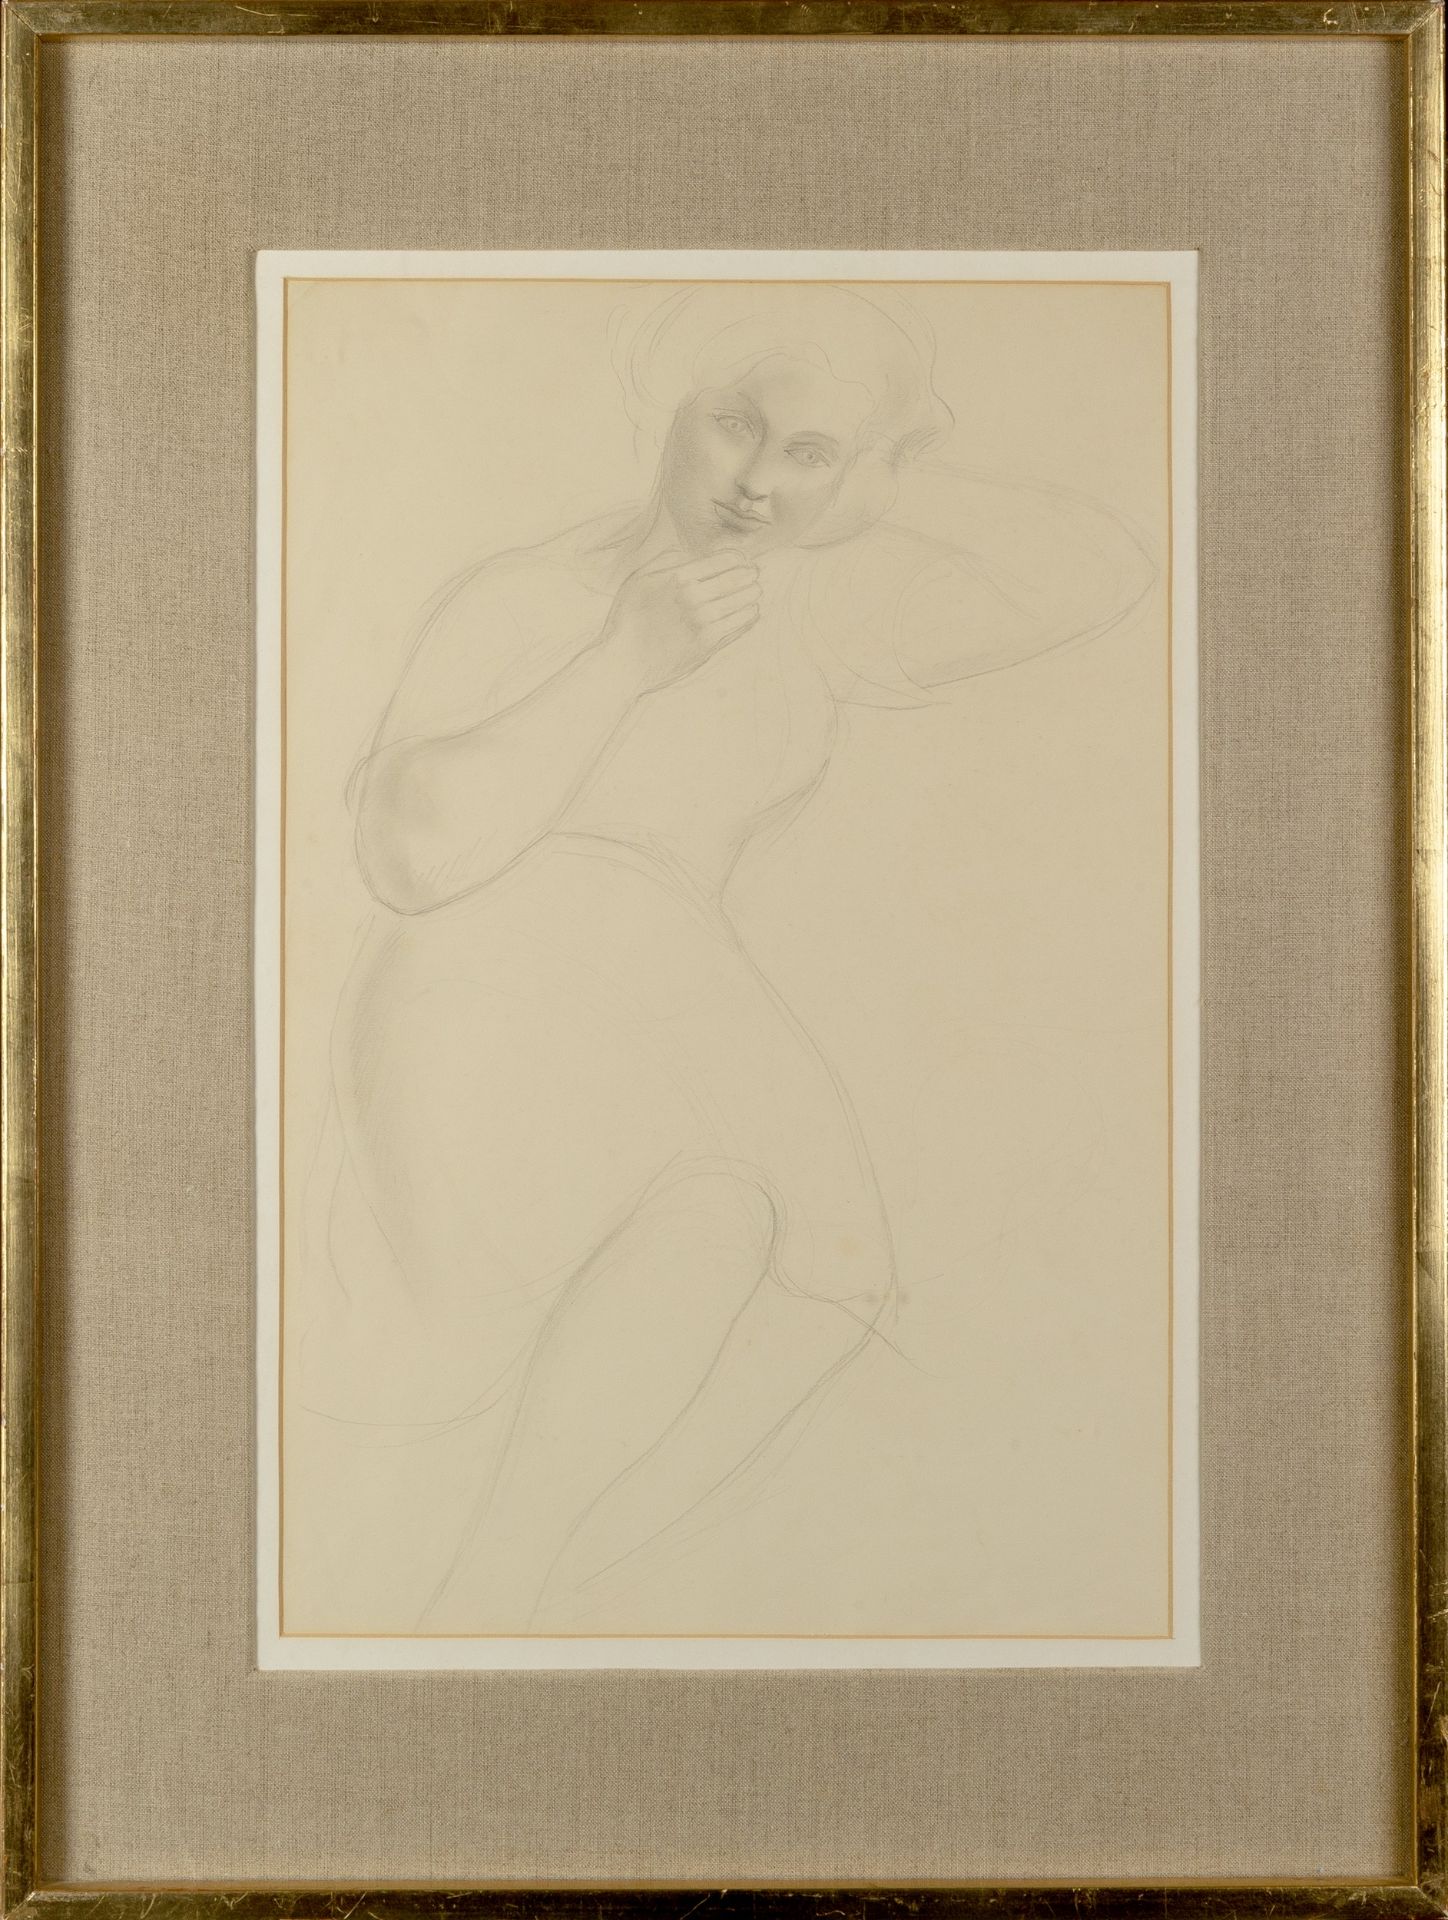 Christopher Wood (1901-1930) Seated Girl pencil on paper 47 x 31cm. Provenance: Mercury Gallery, - Image 2 of 7